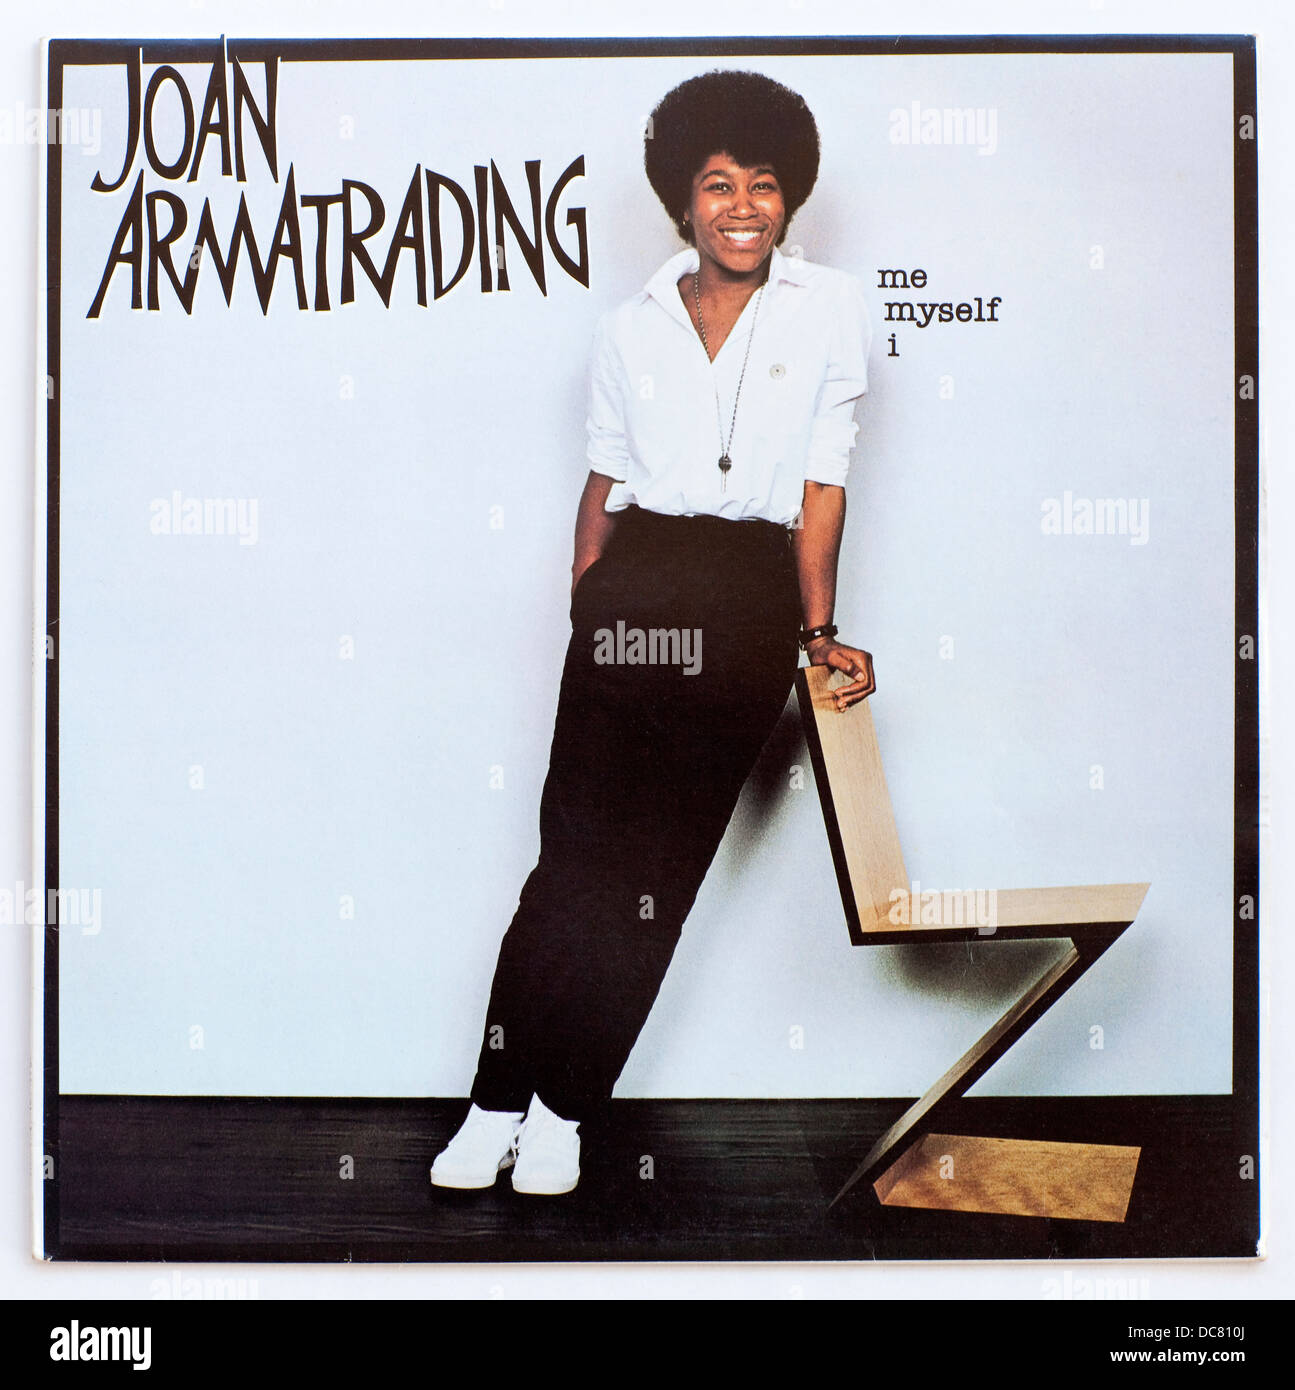 Joan Armatrading - Me Myself I, 1980 album on Festival Records - Editorial use only Stock Photo